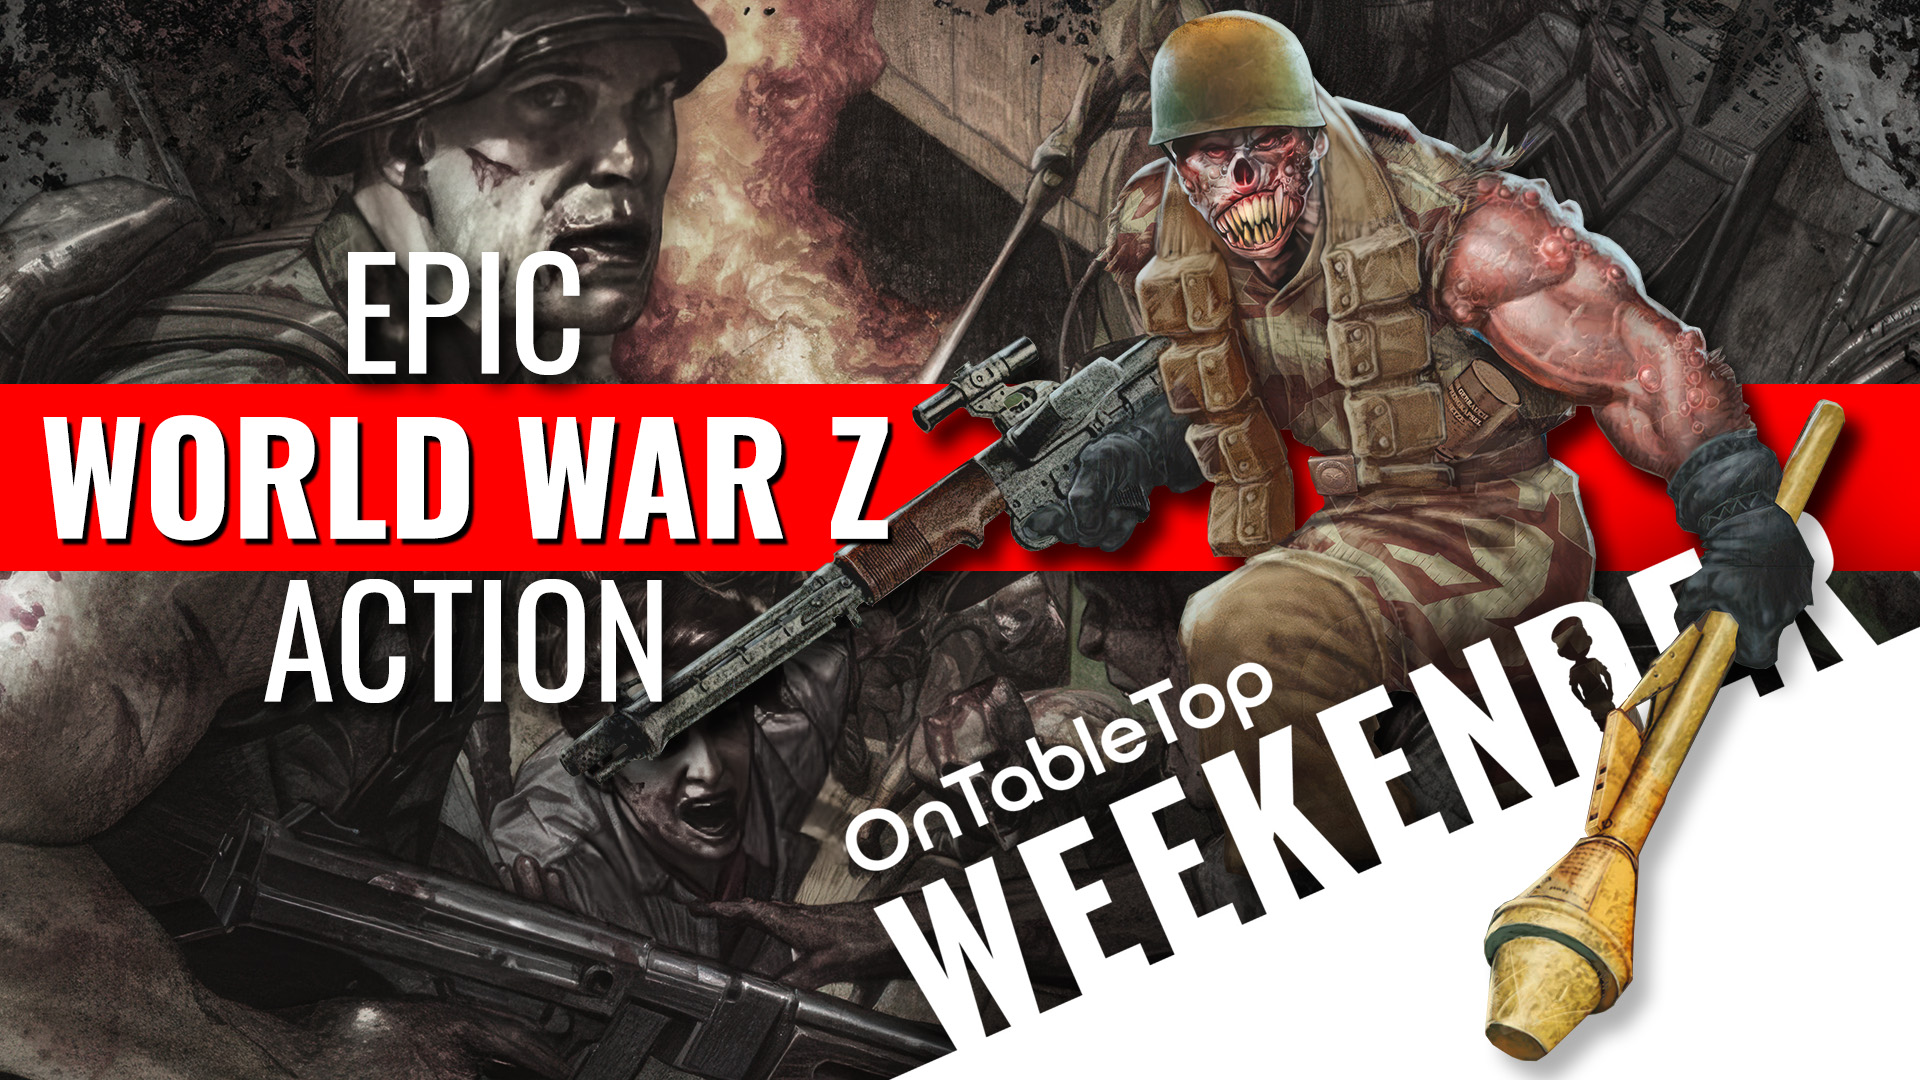 v2 WEEKENDER Epic Weird World War Zombie Outbreak! Escape From Projekt Riese MUST Be On The Radar